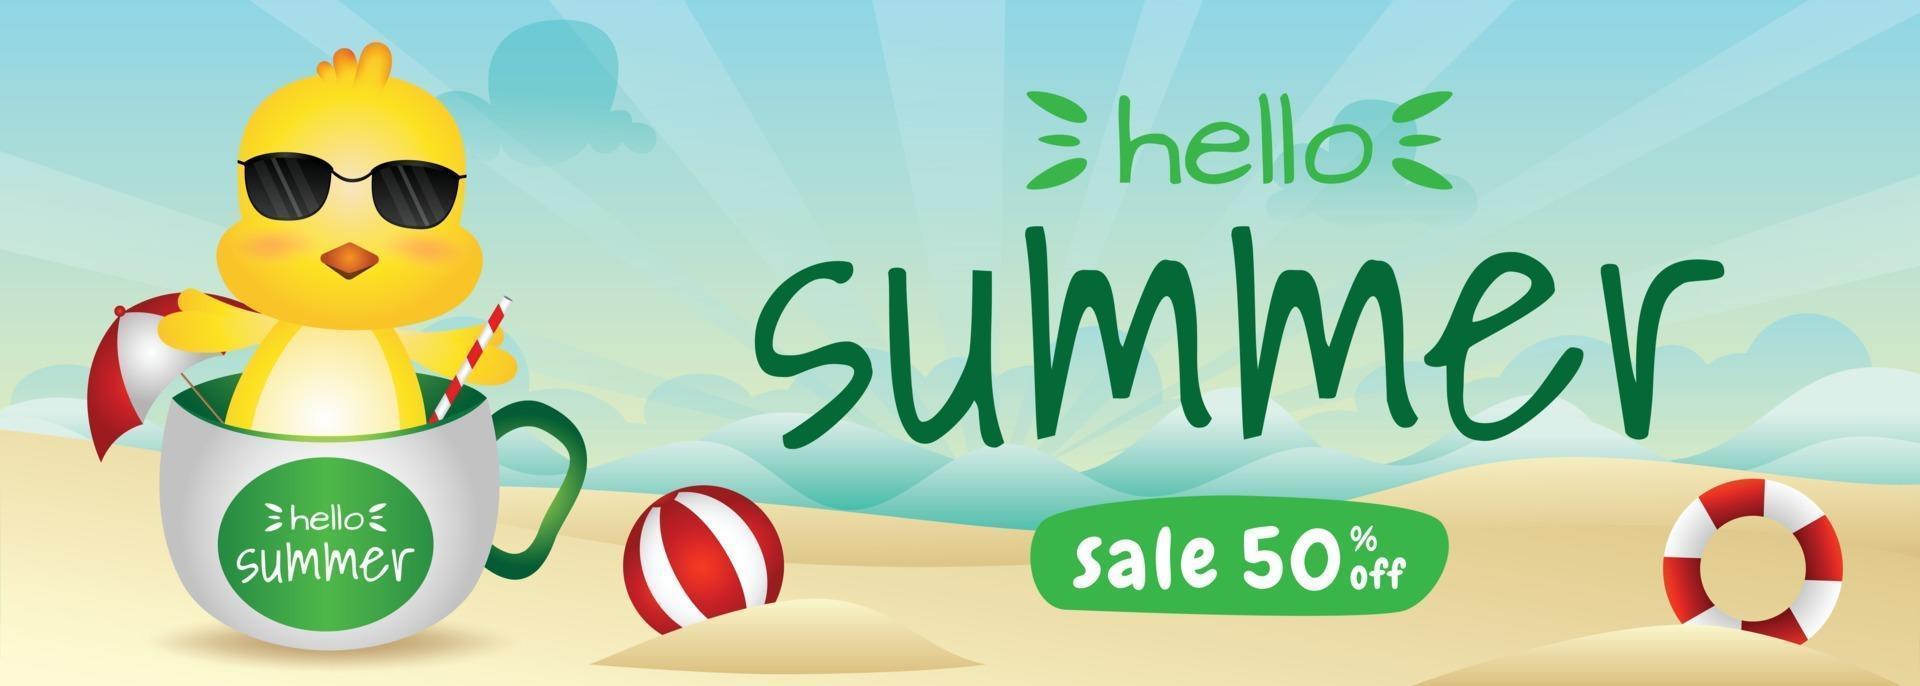 summer sale banner with a cute chick in the cup vector